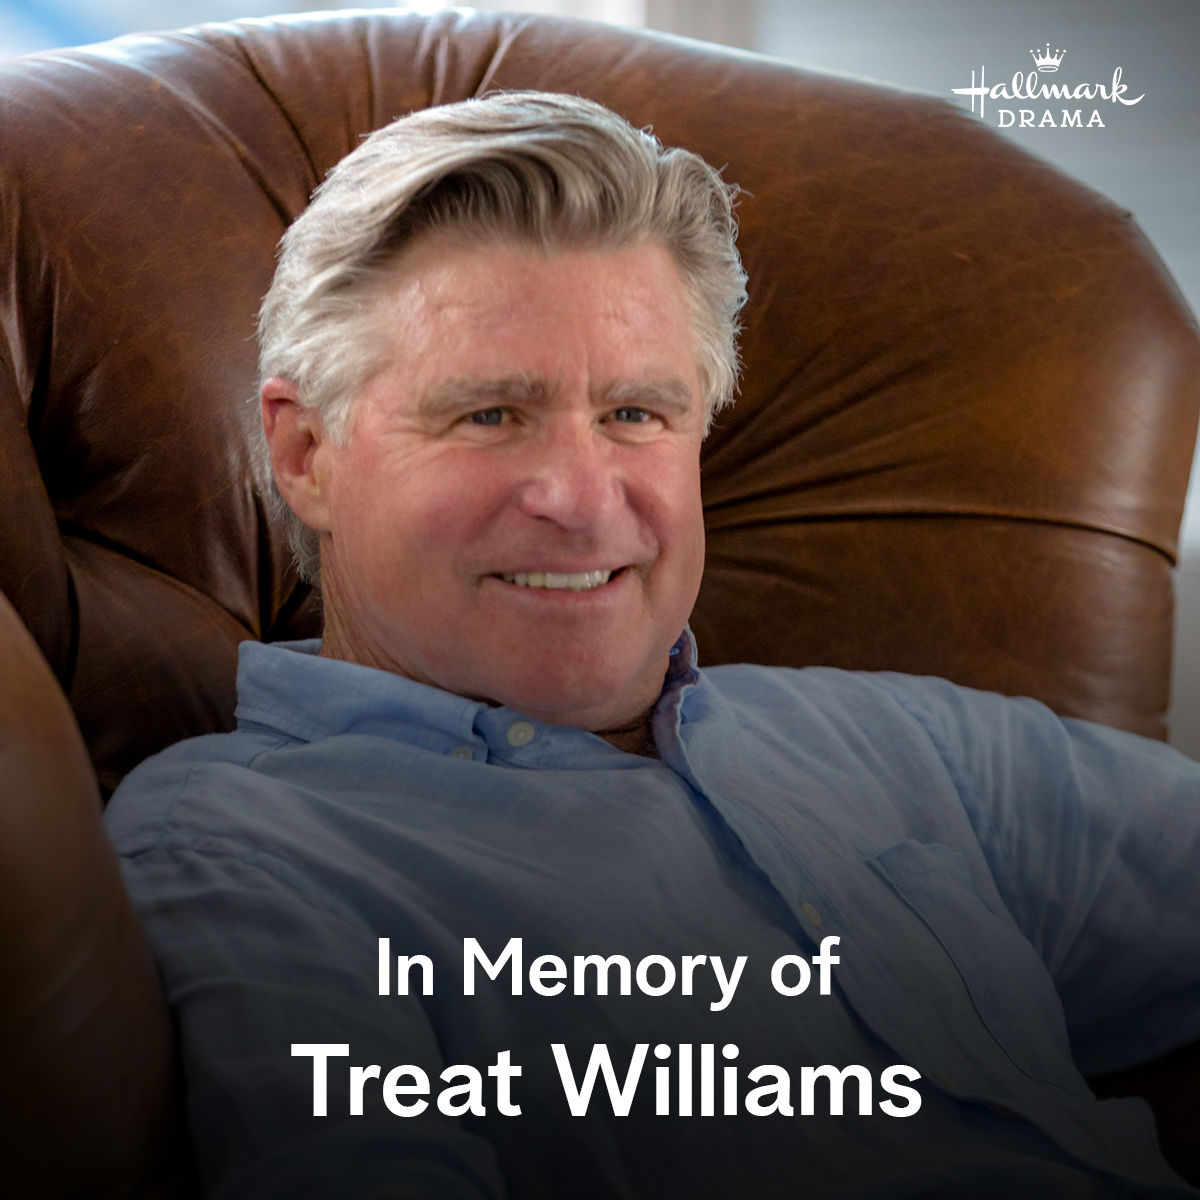 In memory of @Rtreatwilliams watch the entire first season of #ChesapeakeShores starting now.